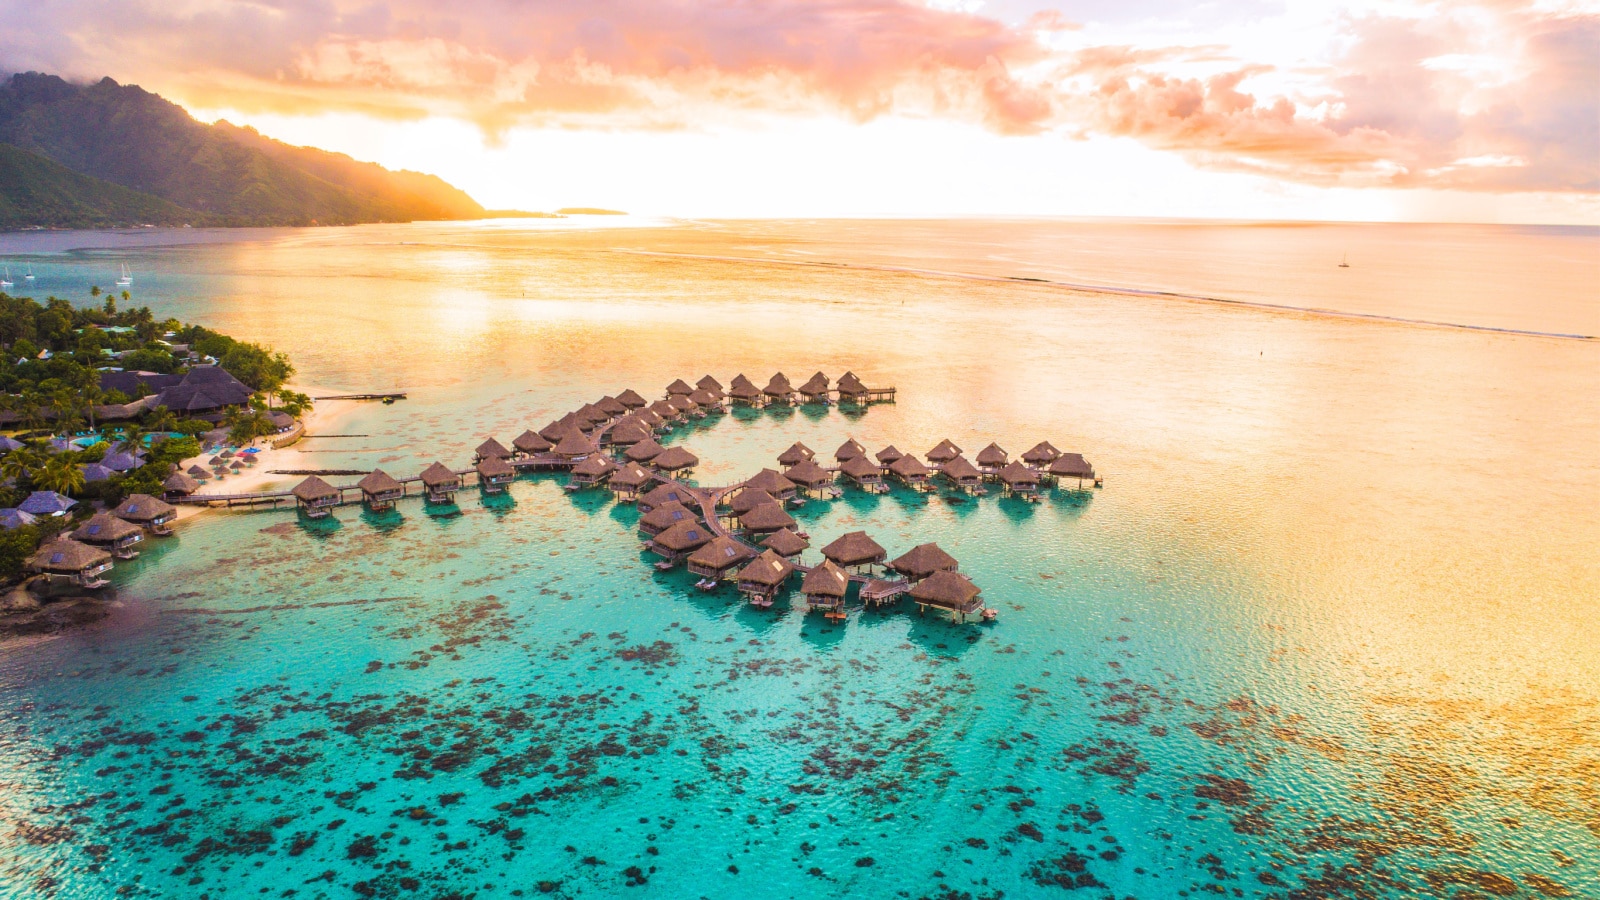 Luxury travel vacation aerial of overwater bungalows resort in coral reef lagoon ocean by beach. View from above at sunset of paradise getaway Moorea, French Polynesia, Tahiti, South Pacific Ocean.